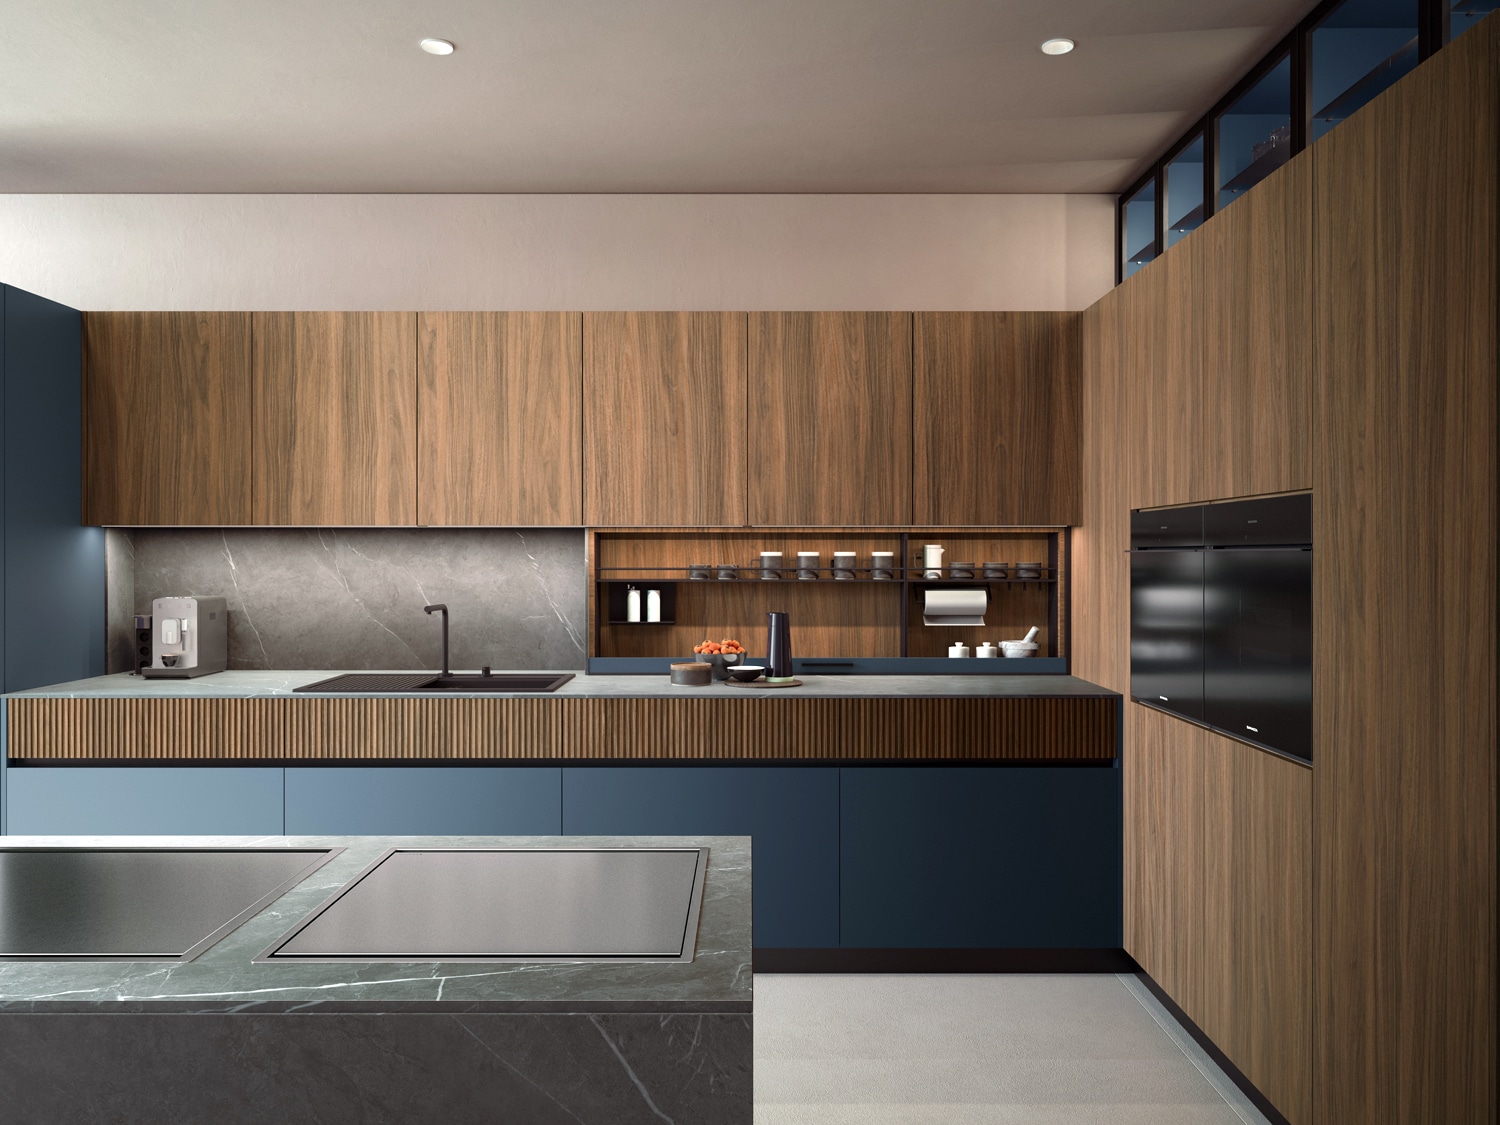 On the wall, under the upper cabinets, is the customizable Mover storage system. When not in use, it remains hidden behind a vertically sliding panel. The use of the same finishes as in the rest of the kitchen makes the unit an integral part of the design, elegant both when open and closed.